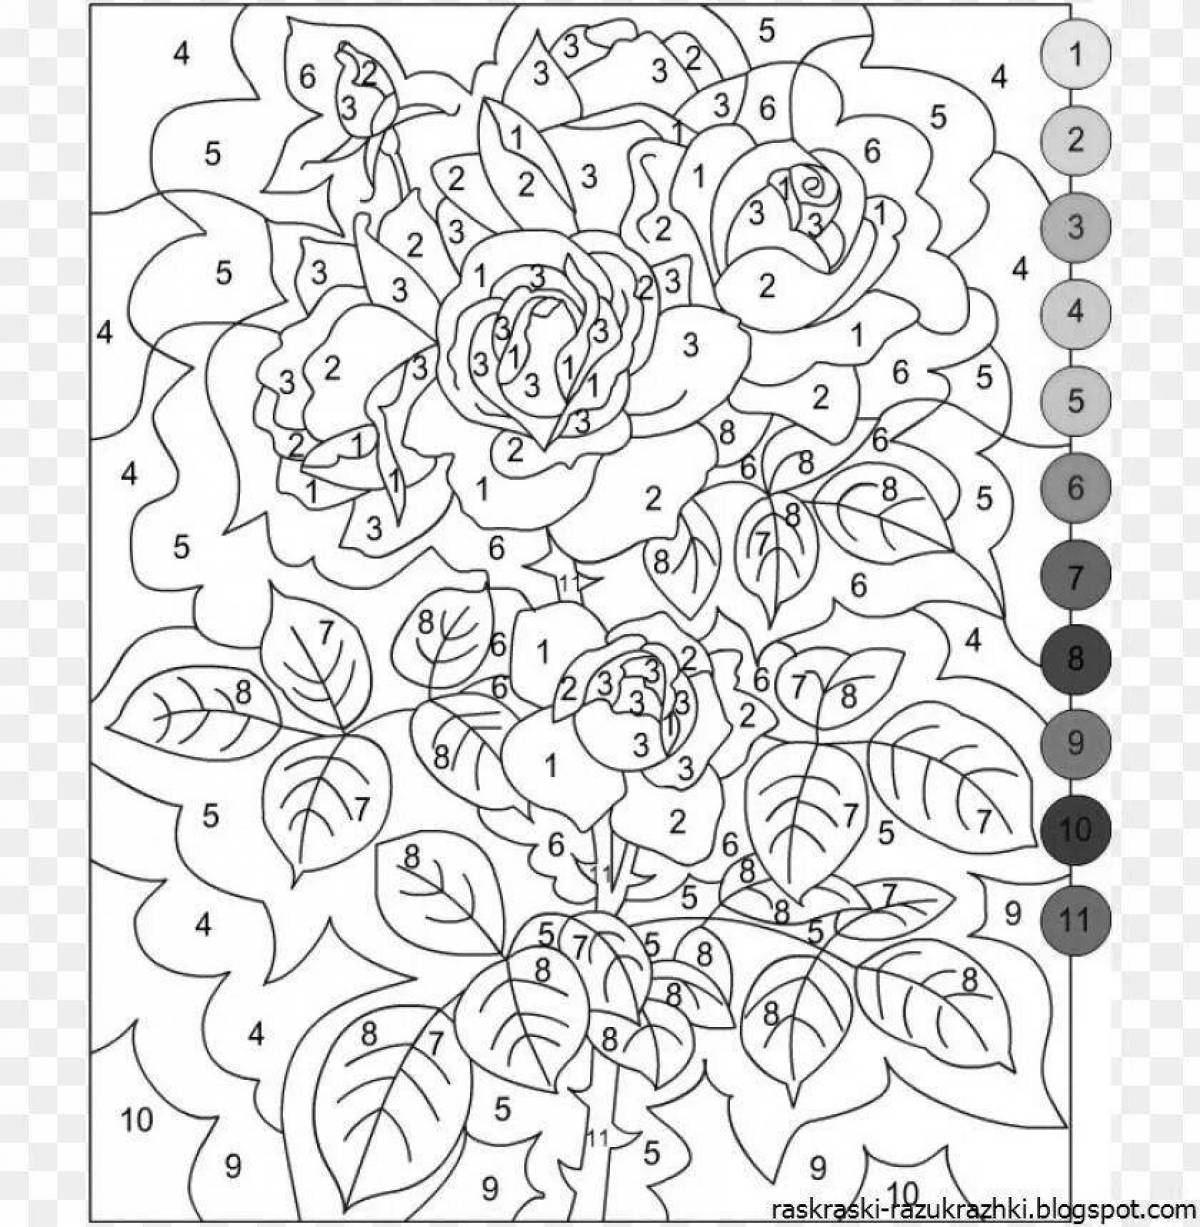 Fun coloring book for adults